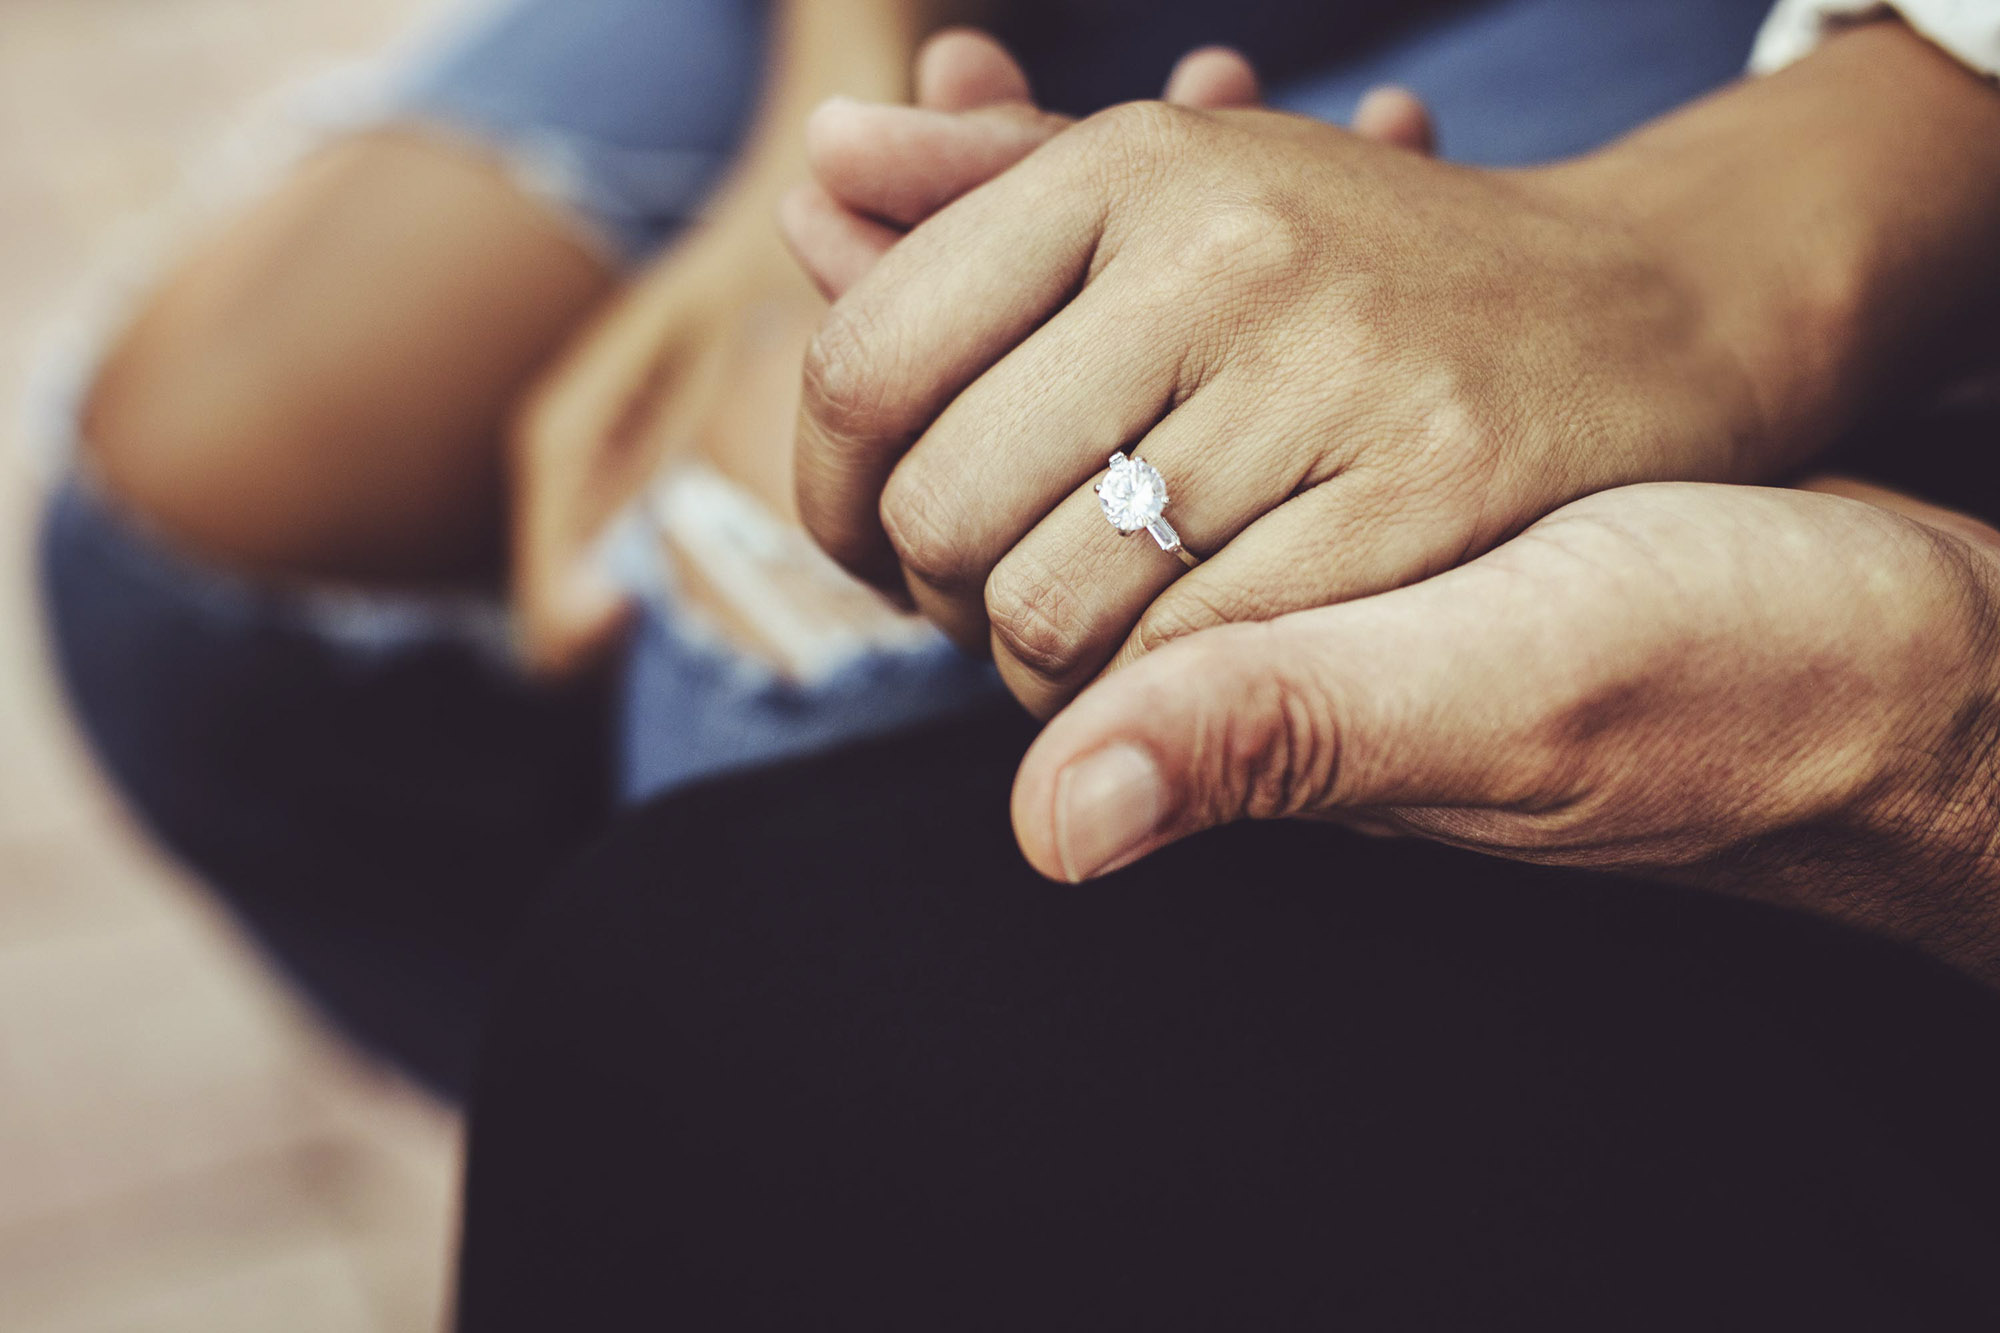 Man and woman holding hands with the woman's diamond ring visible